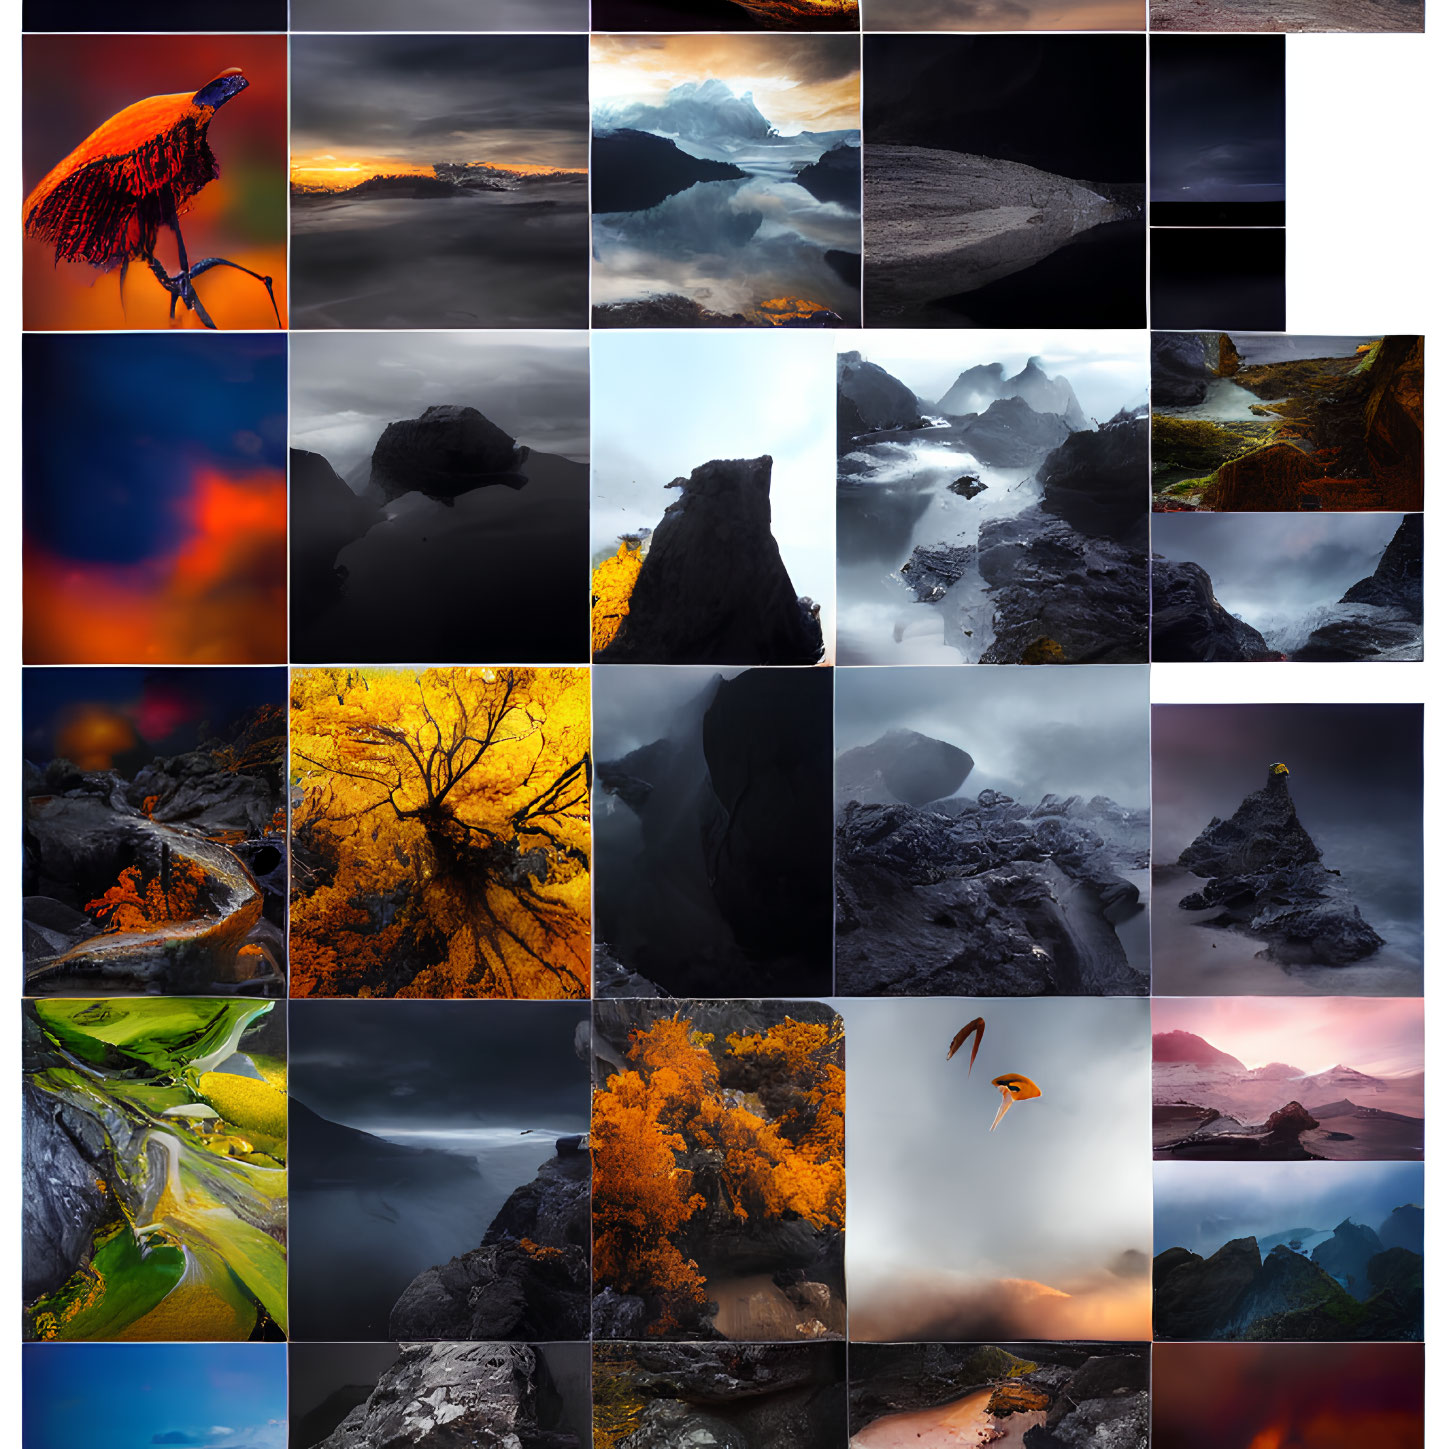 Dramatic Landscape Collage with Mountains, Water, Skies, and Seasons